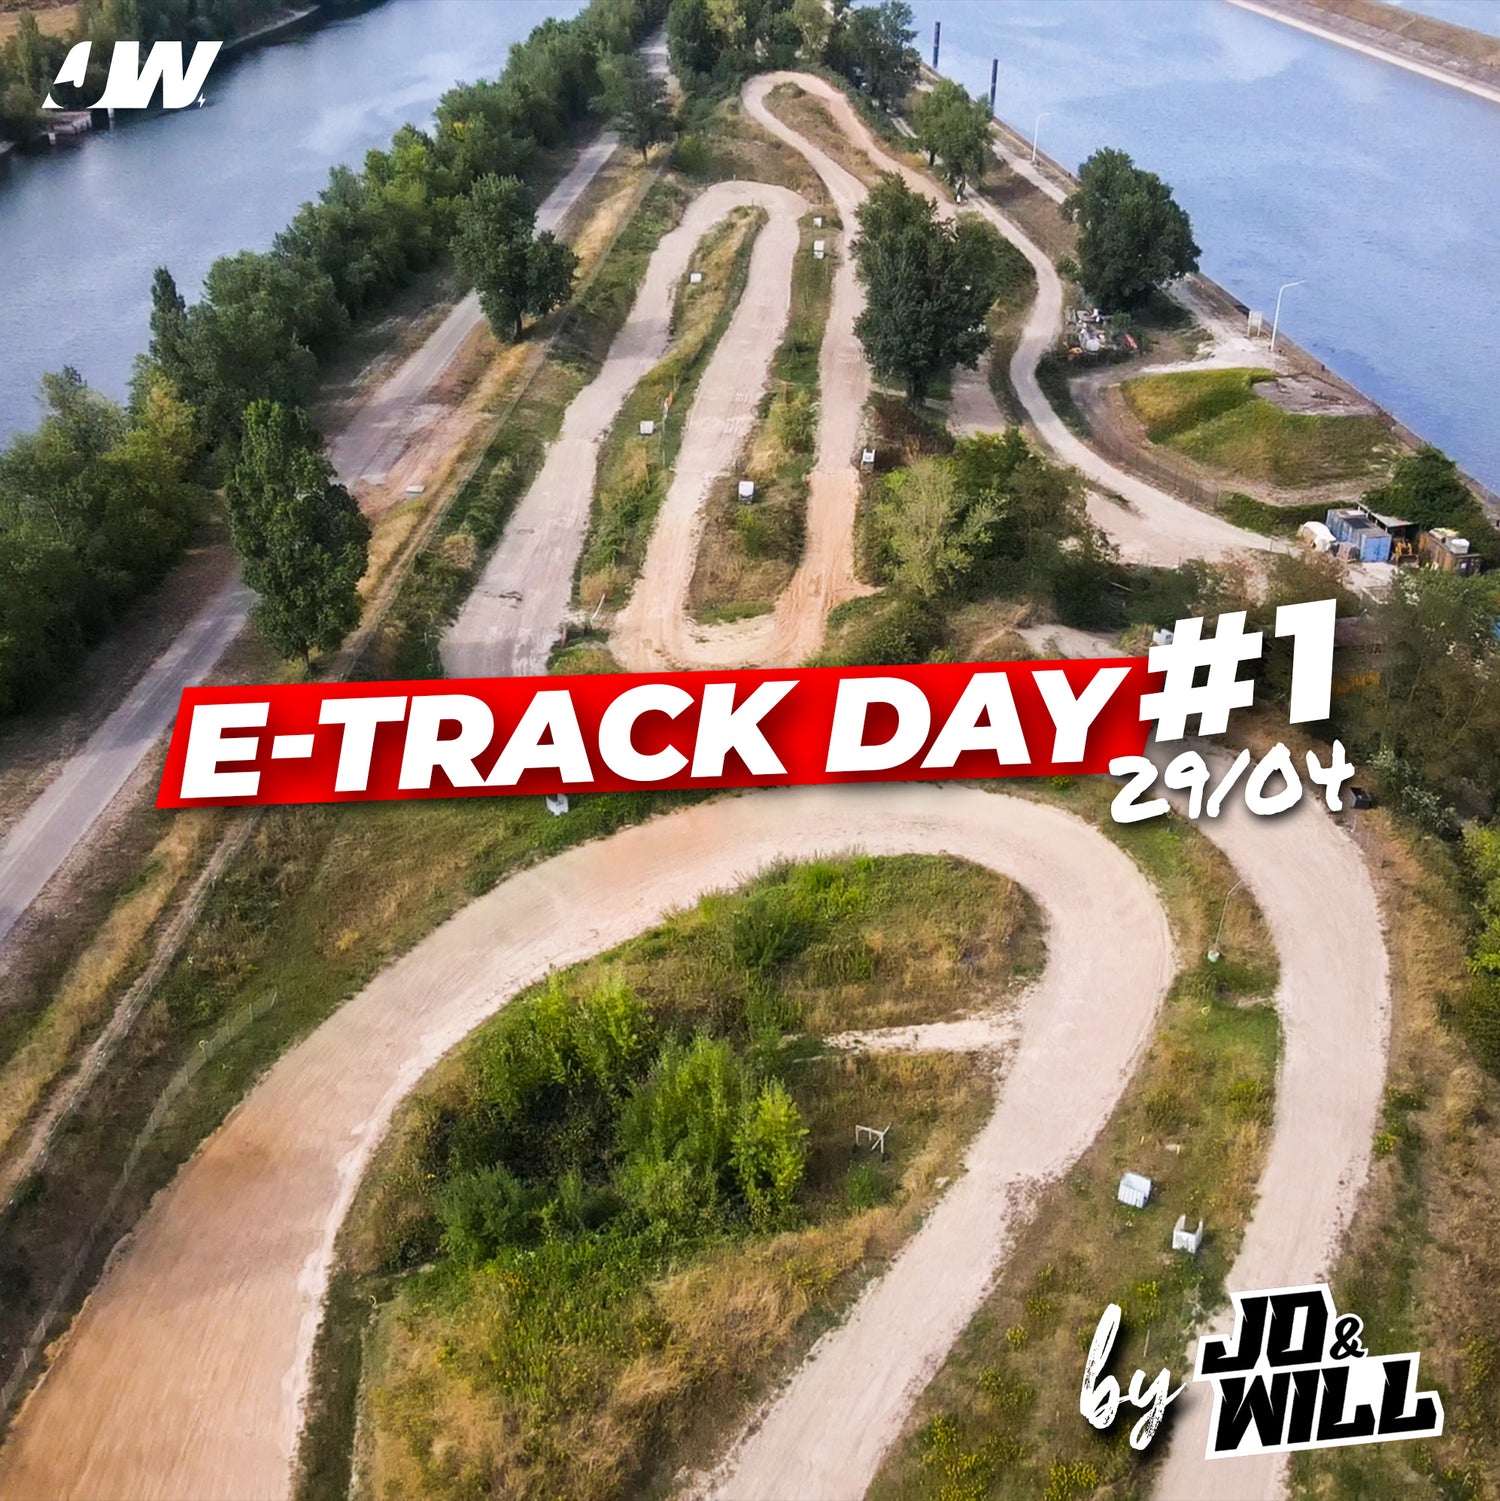 E-Track Days / 100% electric circuit days